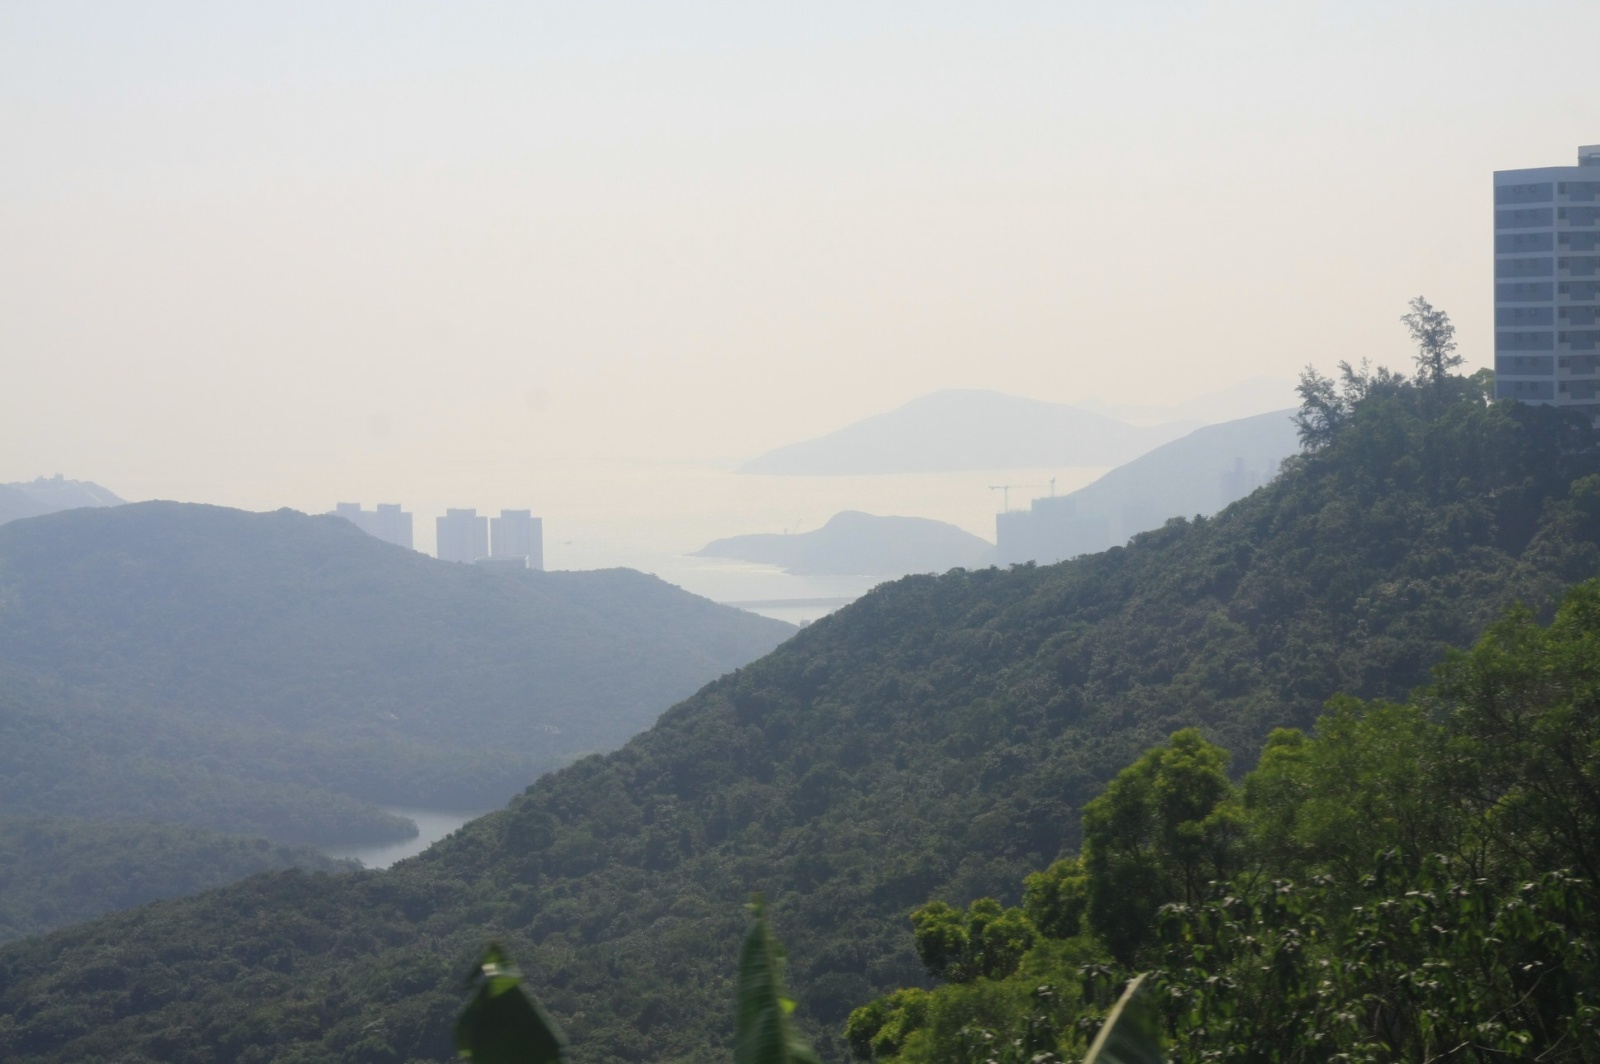 The other side of the Moon - Southern Hong Kong Island is almost always seen against the sun